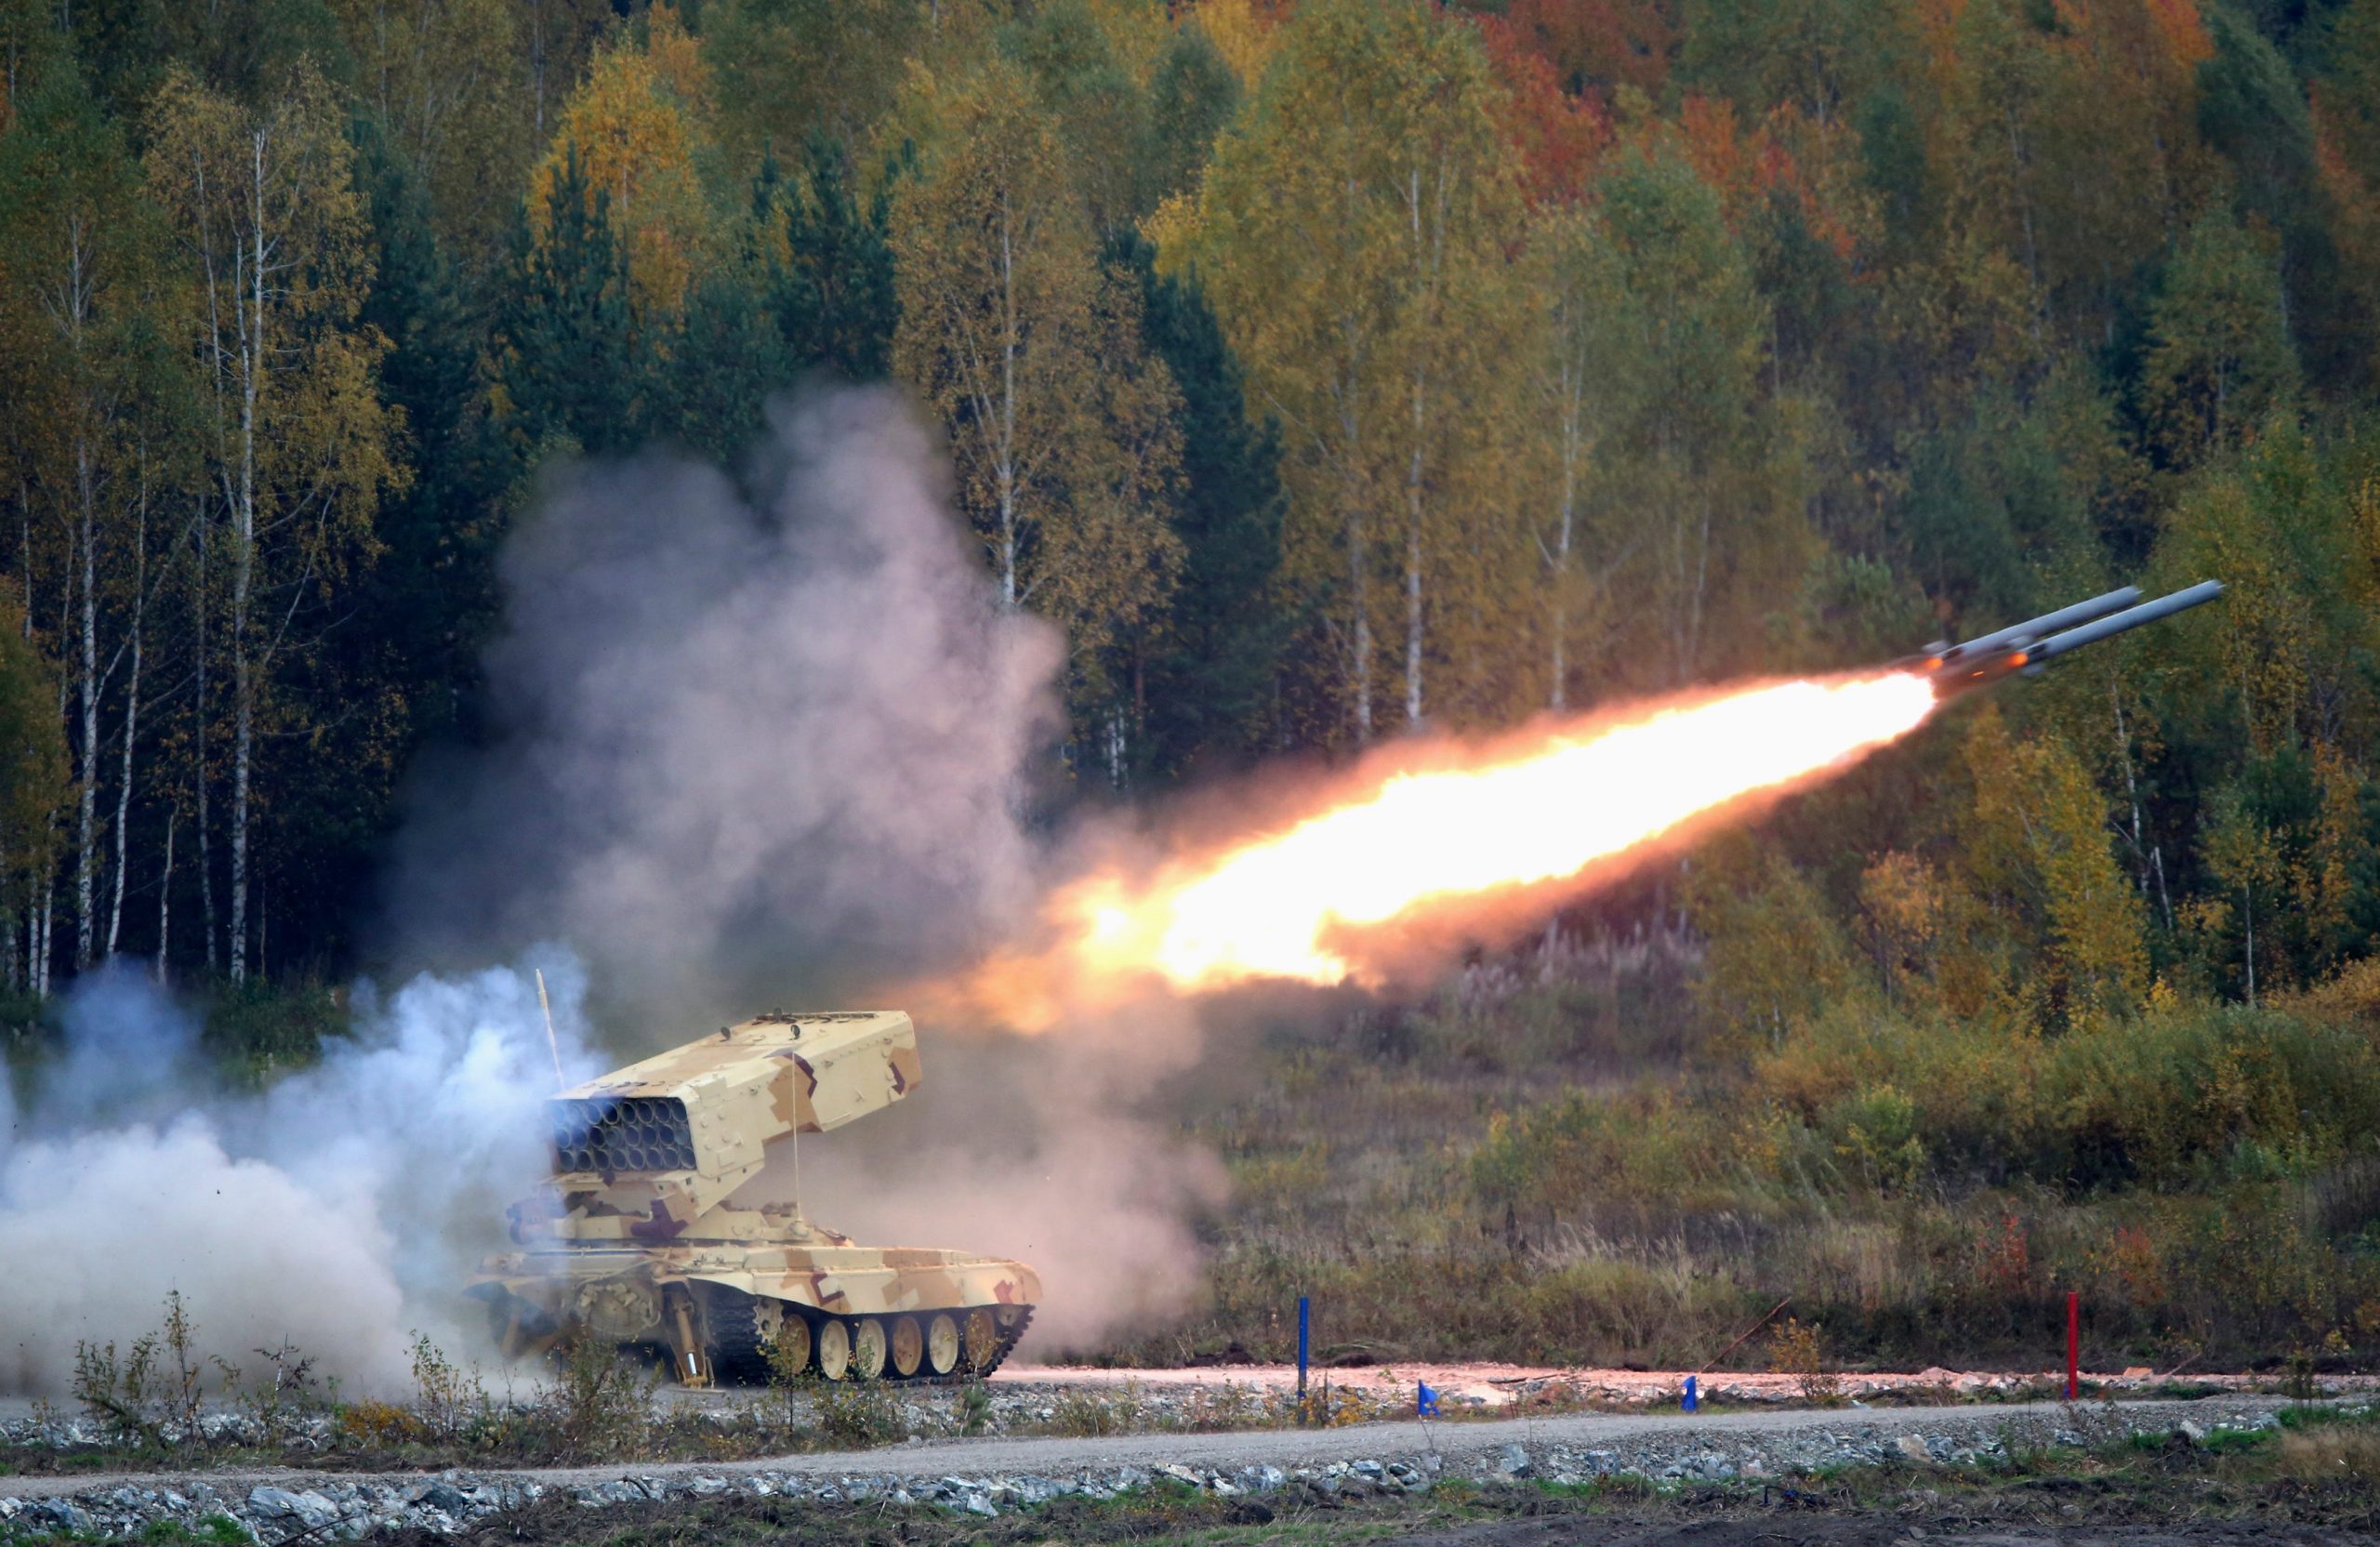 A Russian "TOS-1 Buratino" multiple rocket launcher fires during the "Russia Arms Expo 2013" 9th international exhibition of arms.